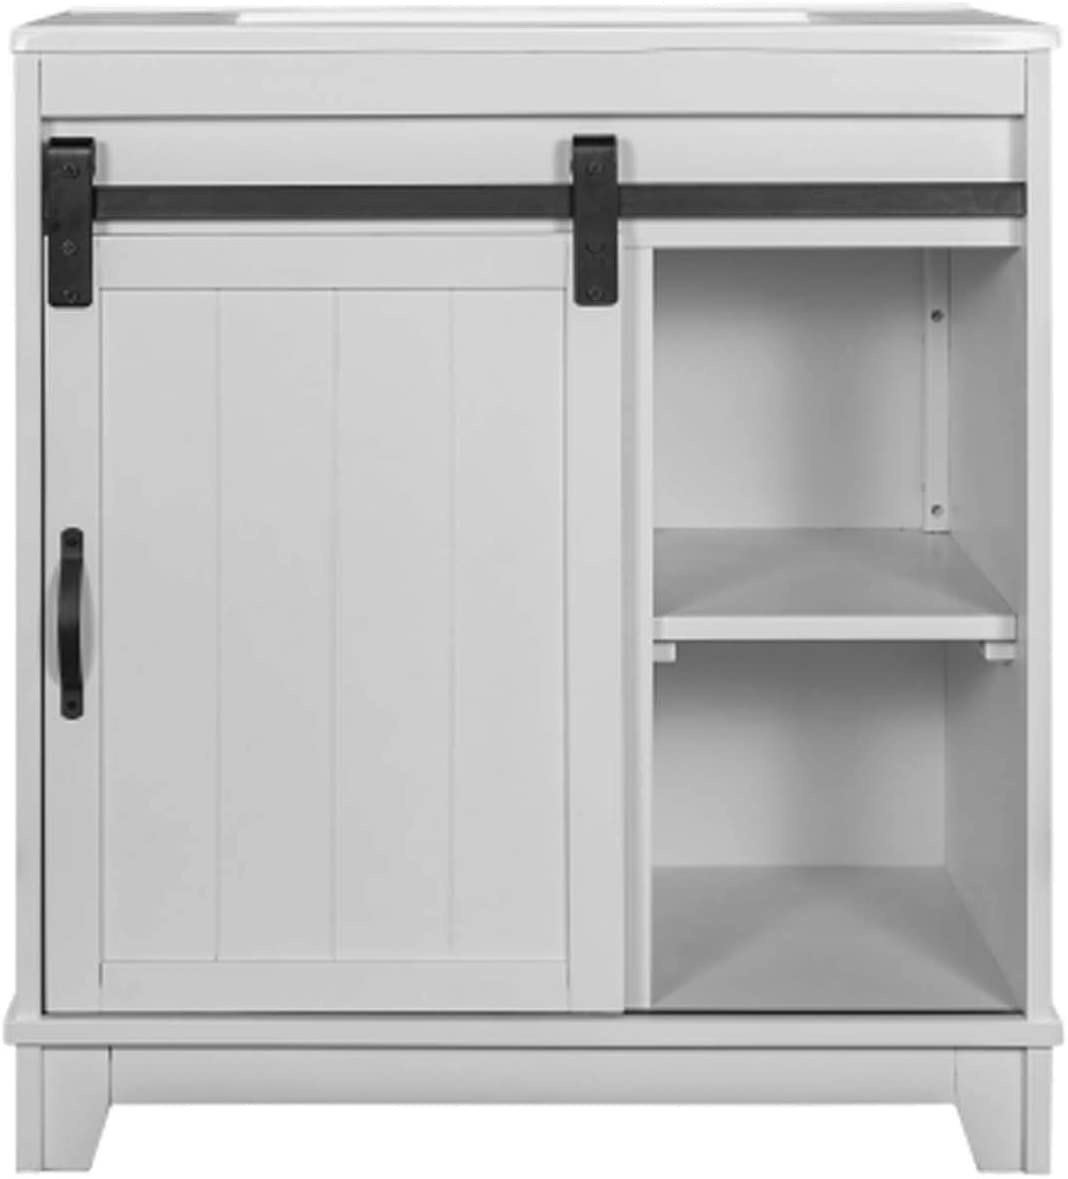 30 inch Free-Standing White Bathroom Vanity with Sliding Bars Door and White Sink